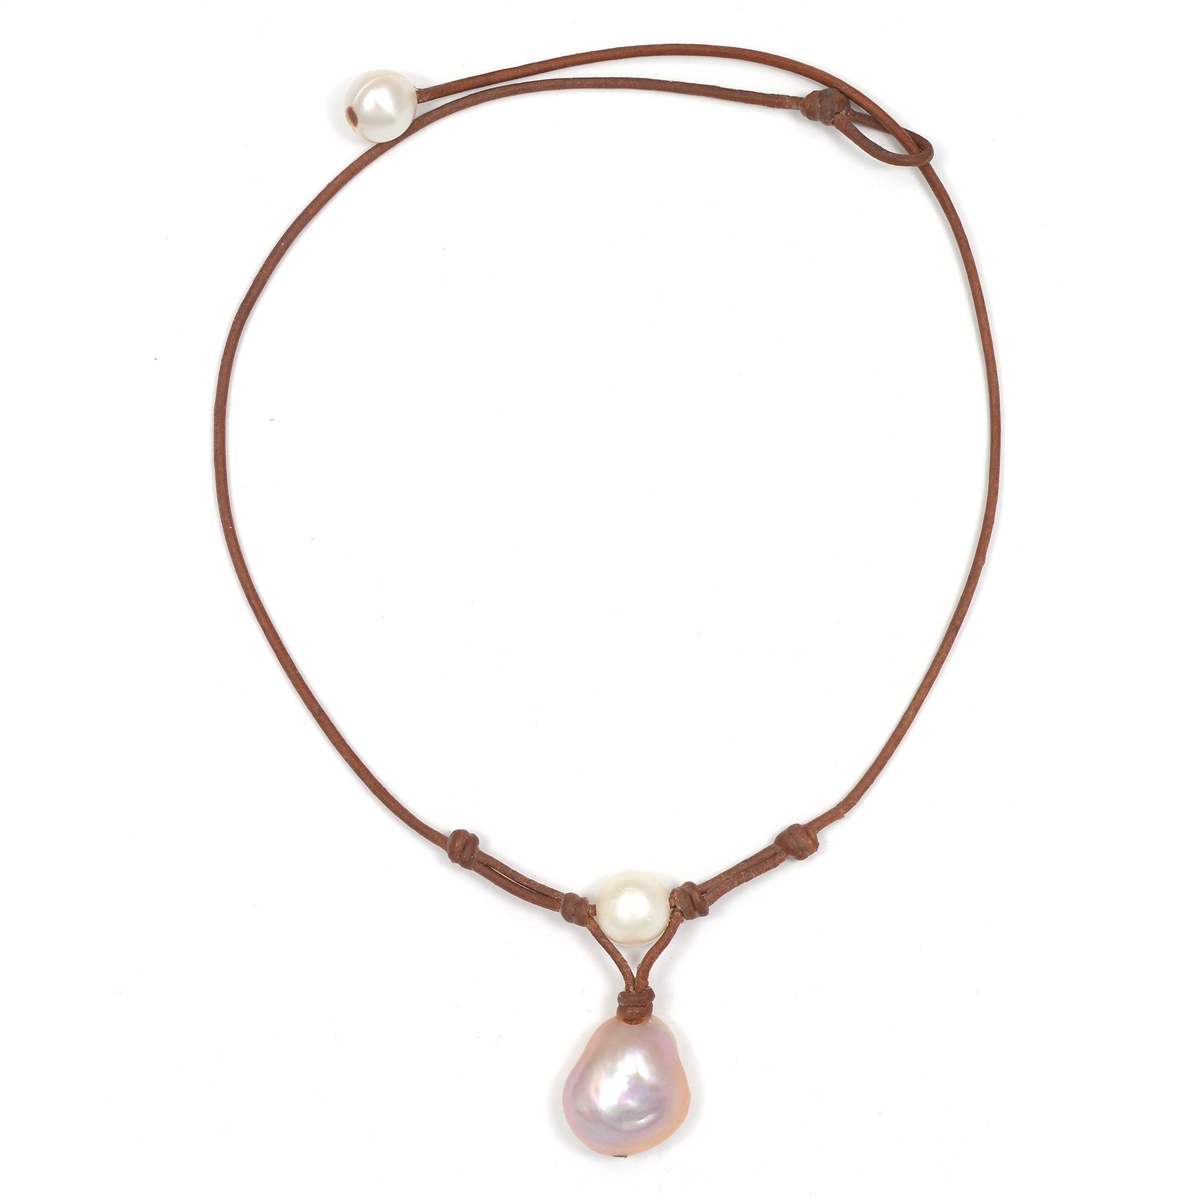 freshwater pearl necklace fine pearls and leather jewelry by designer wendy mignot grove freshwater MUYVKIB